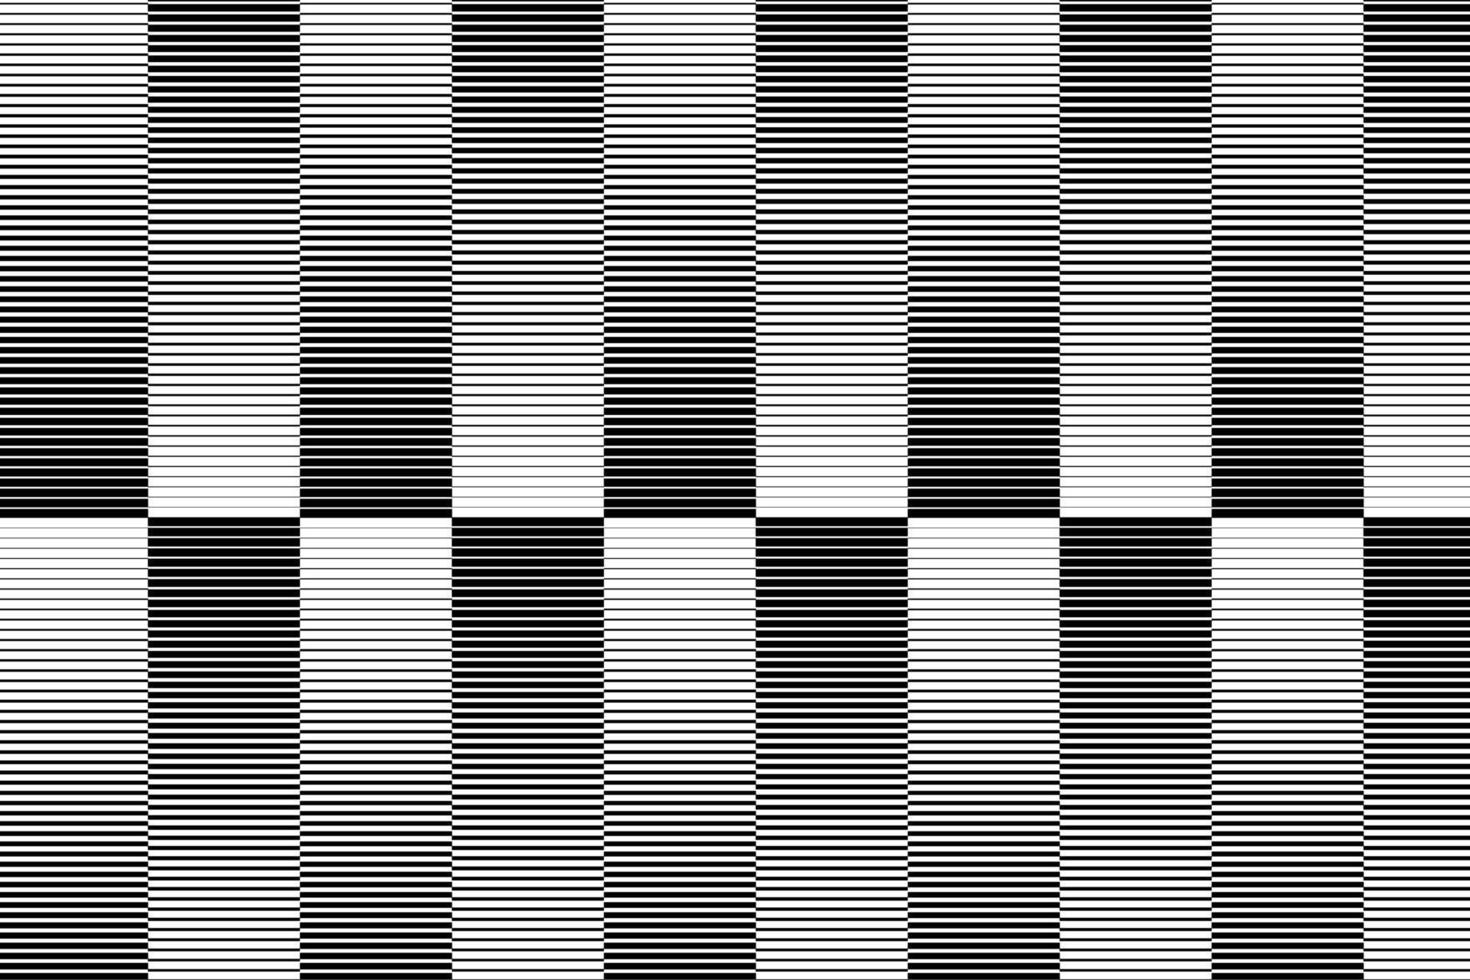 abstract seamless black geometric monochrome pattern template. vector